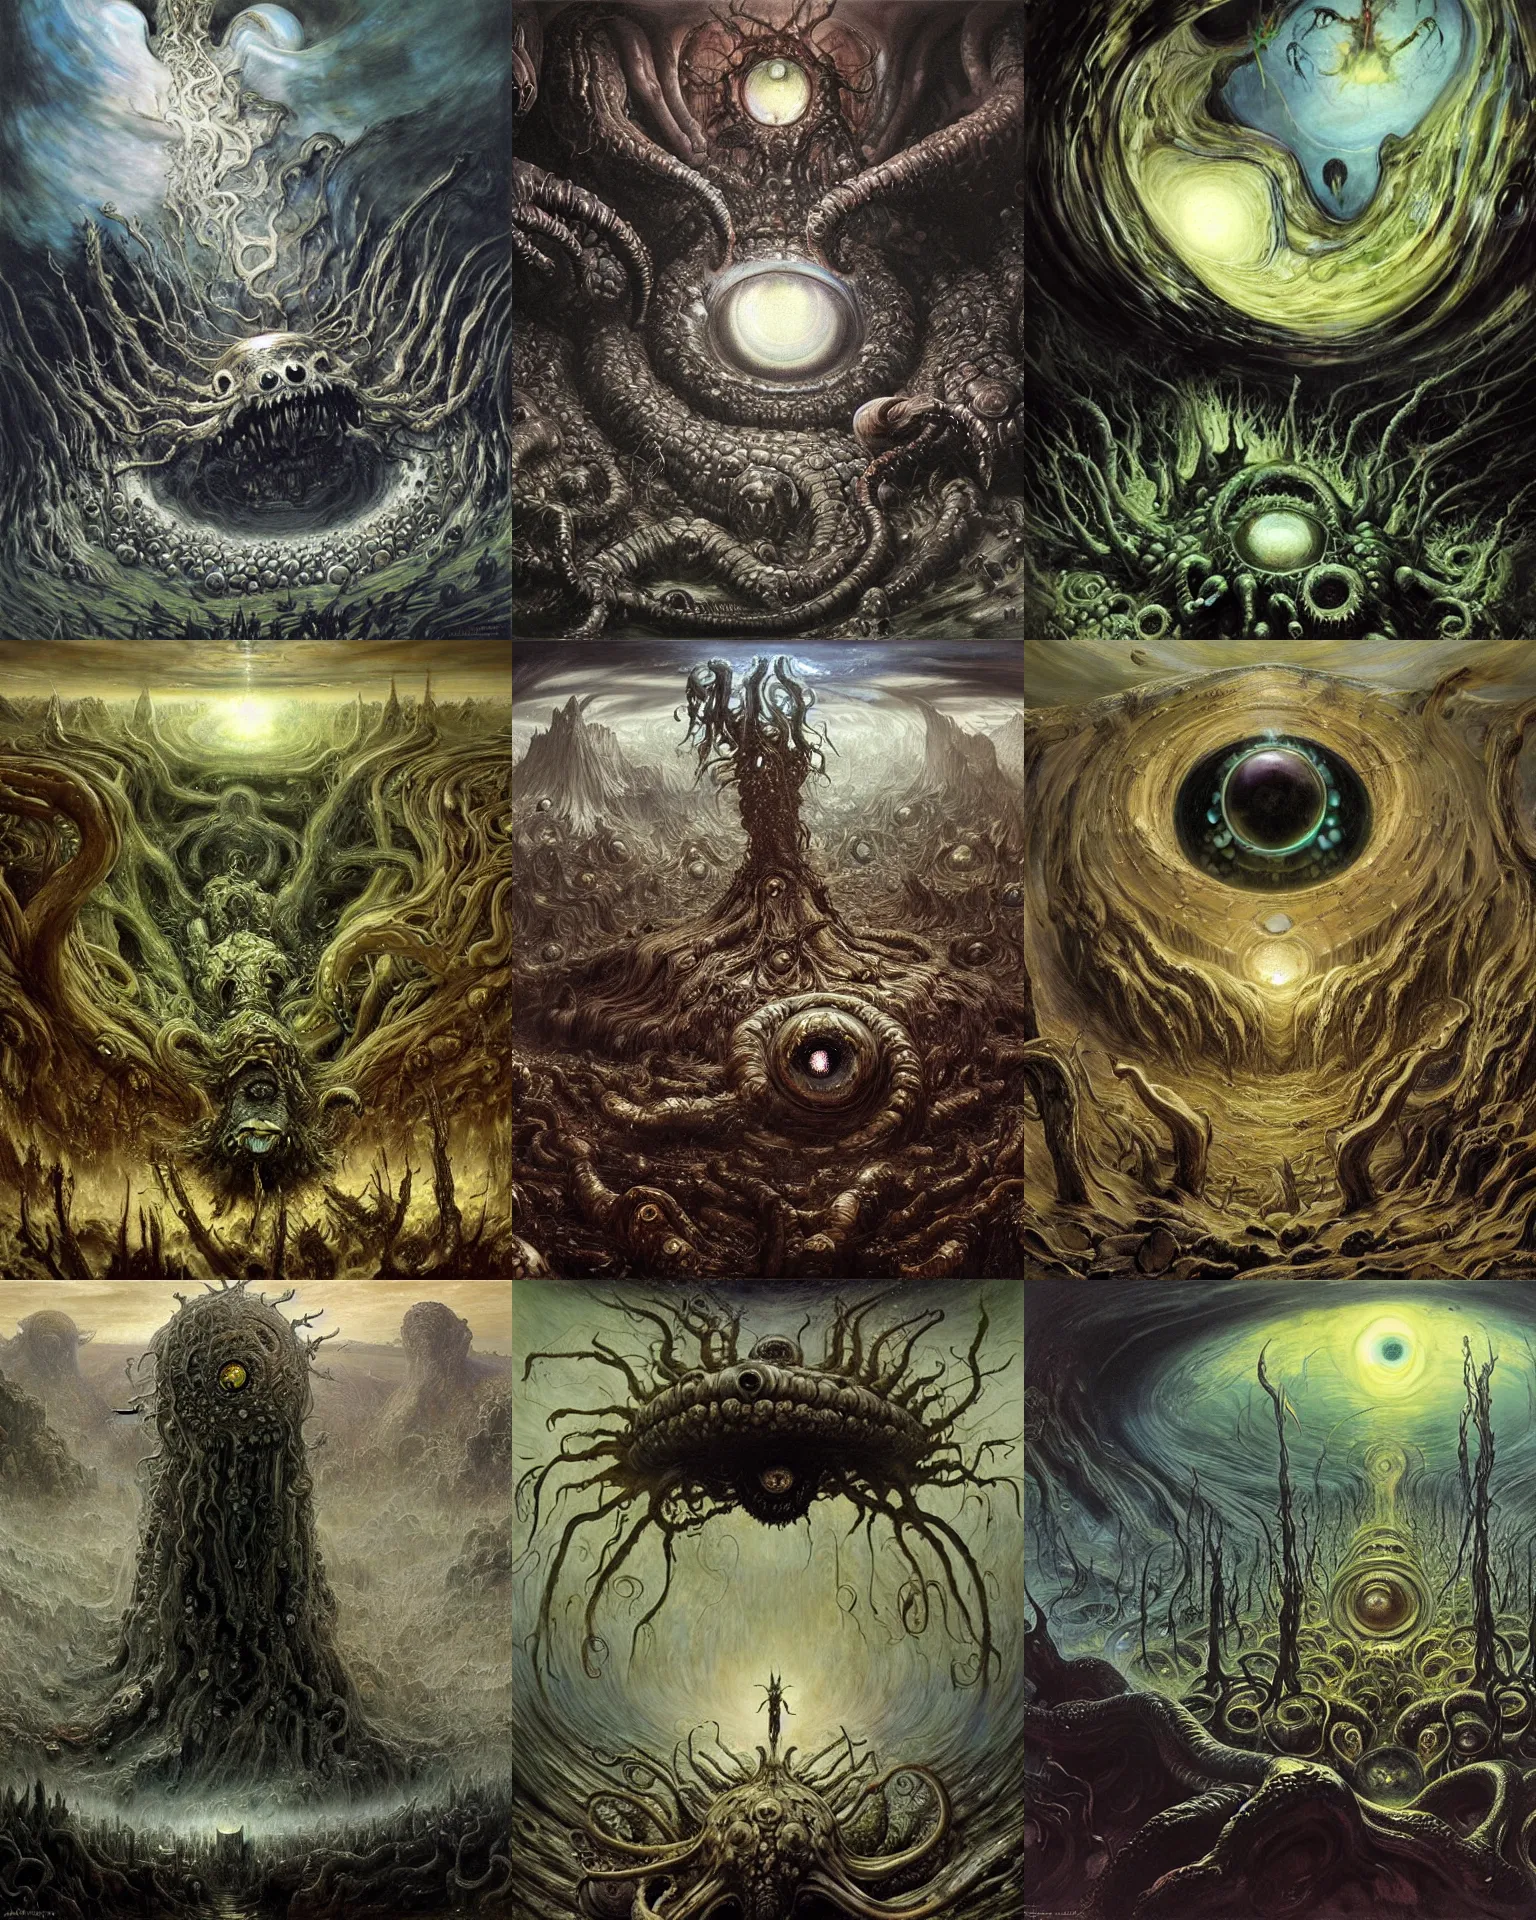 Prompt: ritual of otherworldly massive shoggoth god arising over grim obsidian landscape made of giant eyeballs, painting by donato giancola, artgerm, edvard munch john berkey, gustave dore, thomas moran, hieronymus bosch, hp lovecraft, paranoid vibe, terror giant infinite eyes horror spider eyes tentacles maggots feeling of madness and insanity